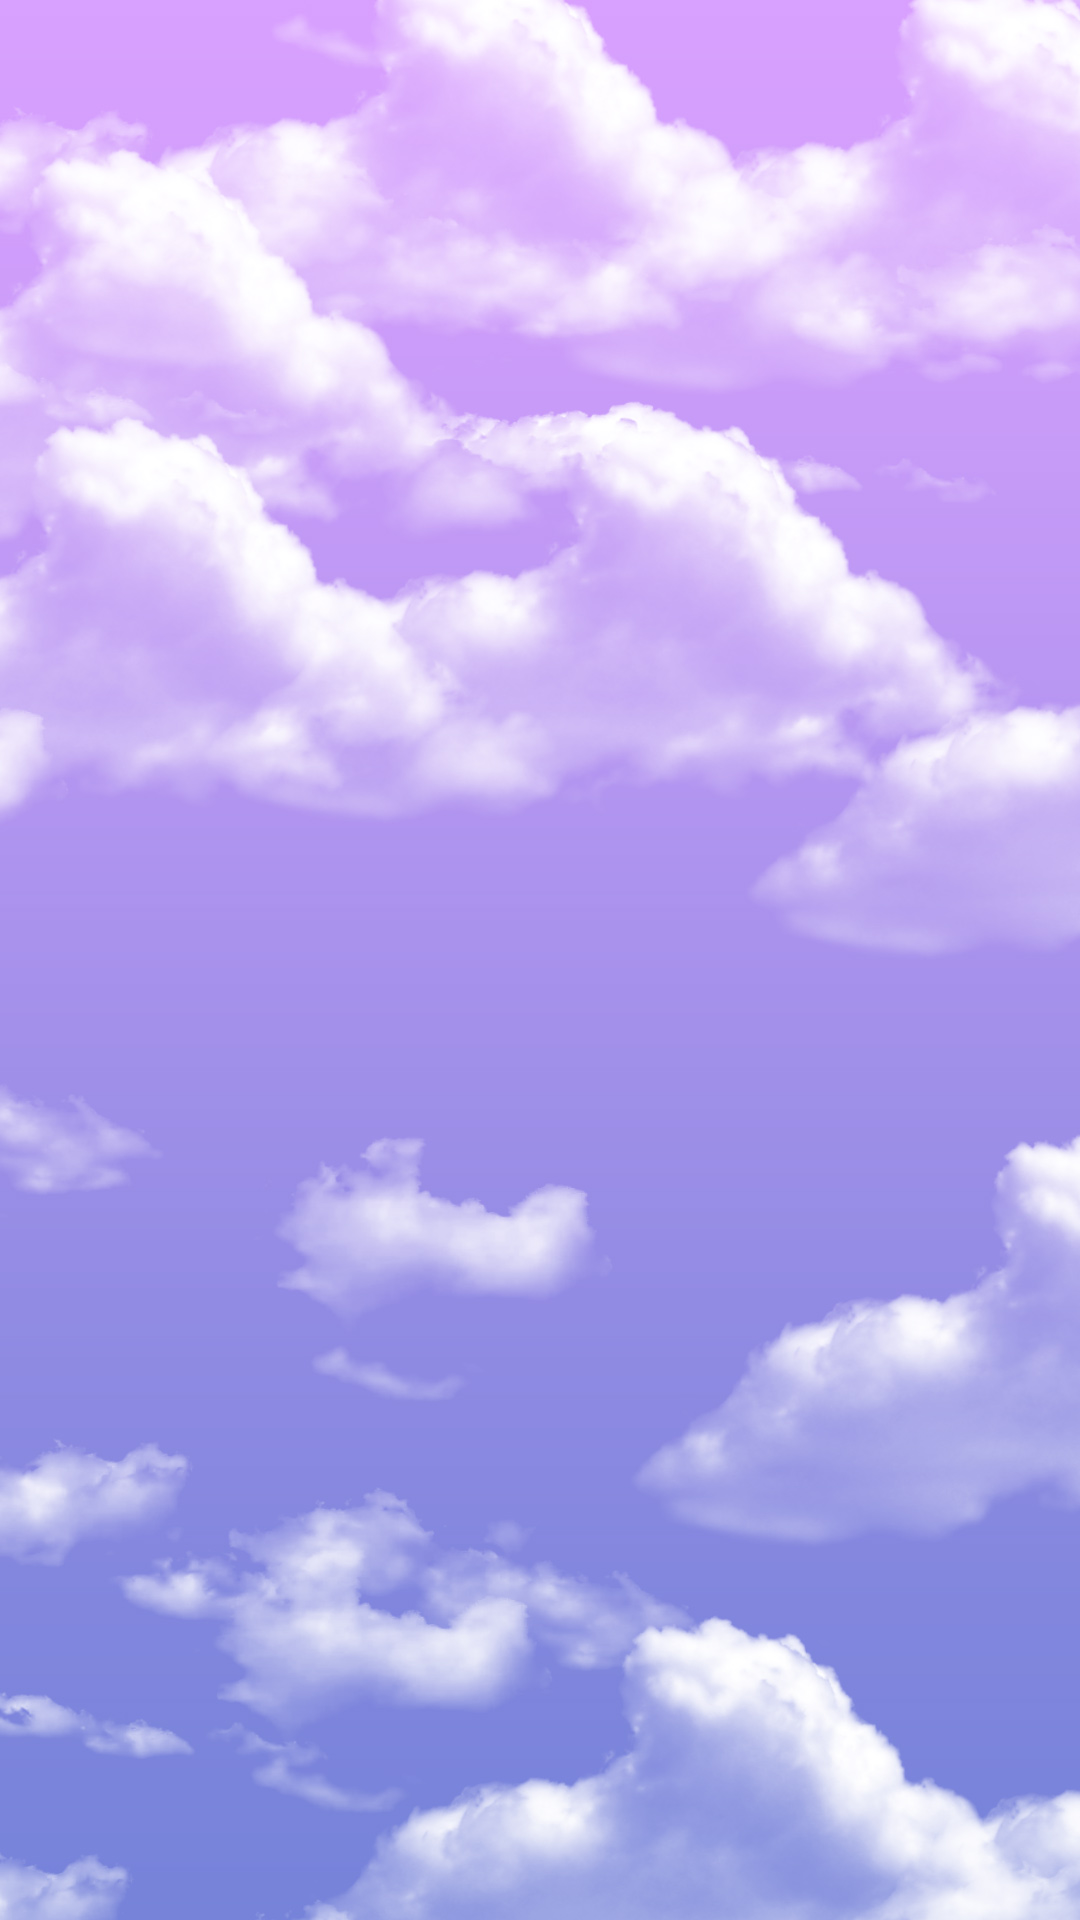 Clouds and Sky aesthetic insta 1080 x 1920 px background - veeForu